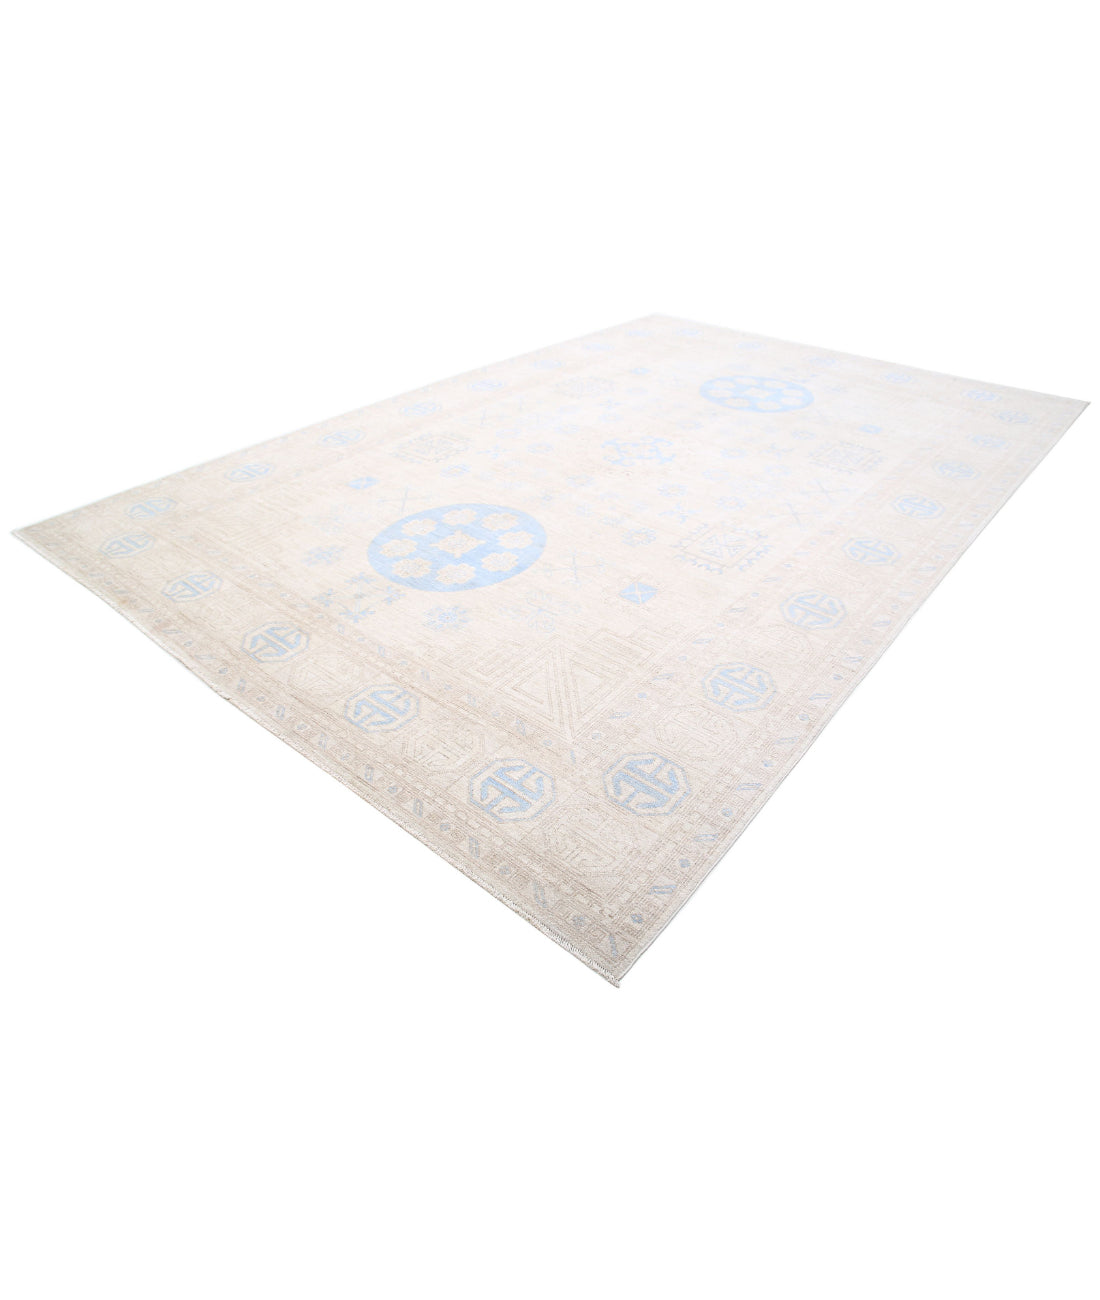 Hand Knotted Khotan Wool Rug - 9'10'' x 14'11'' 9'10'' x 14'11'' (295 X 448) / Ivory / Taupe